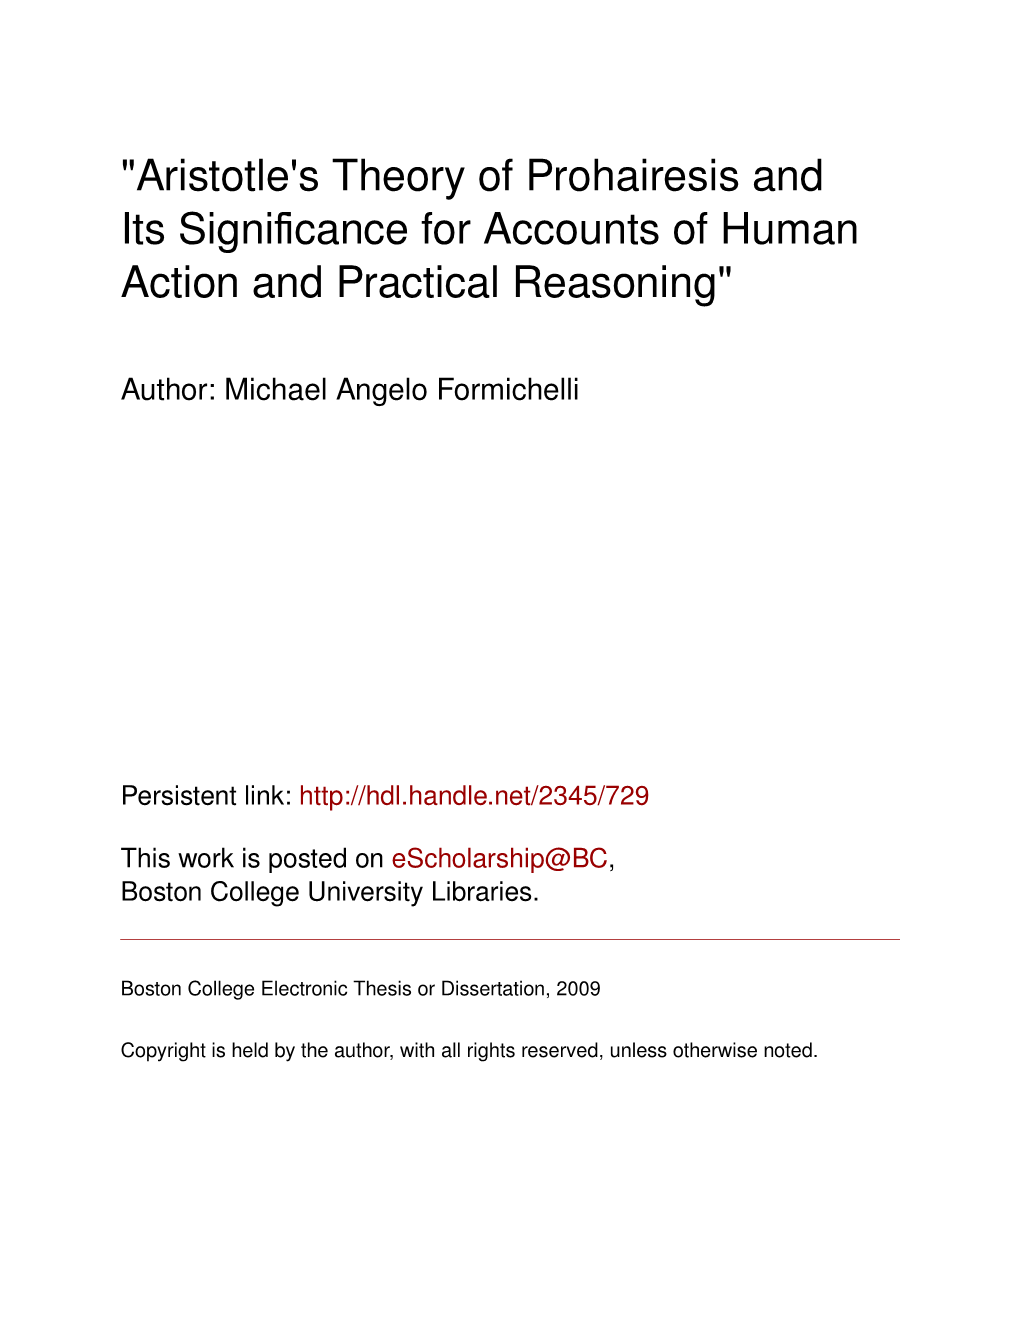 Aristotle's Theory of Prohairesis and Its Significance for Accounts of Human Action and Practical Reasoning